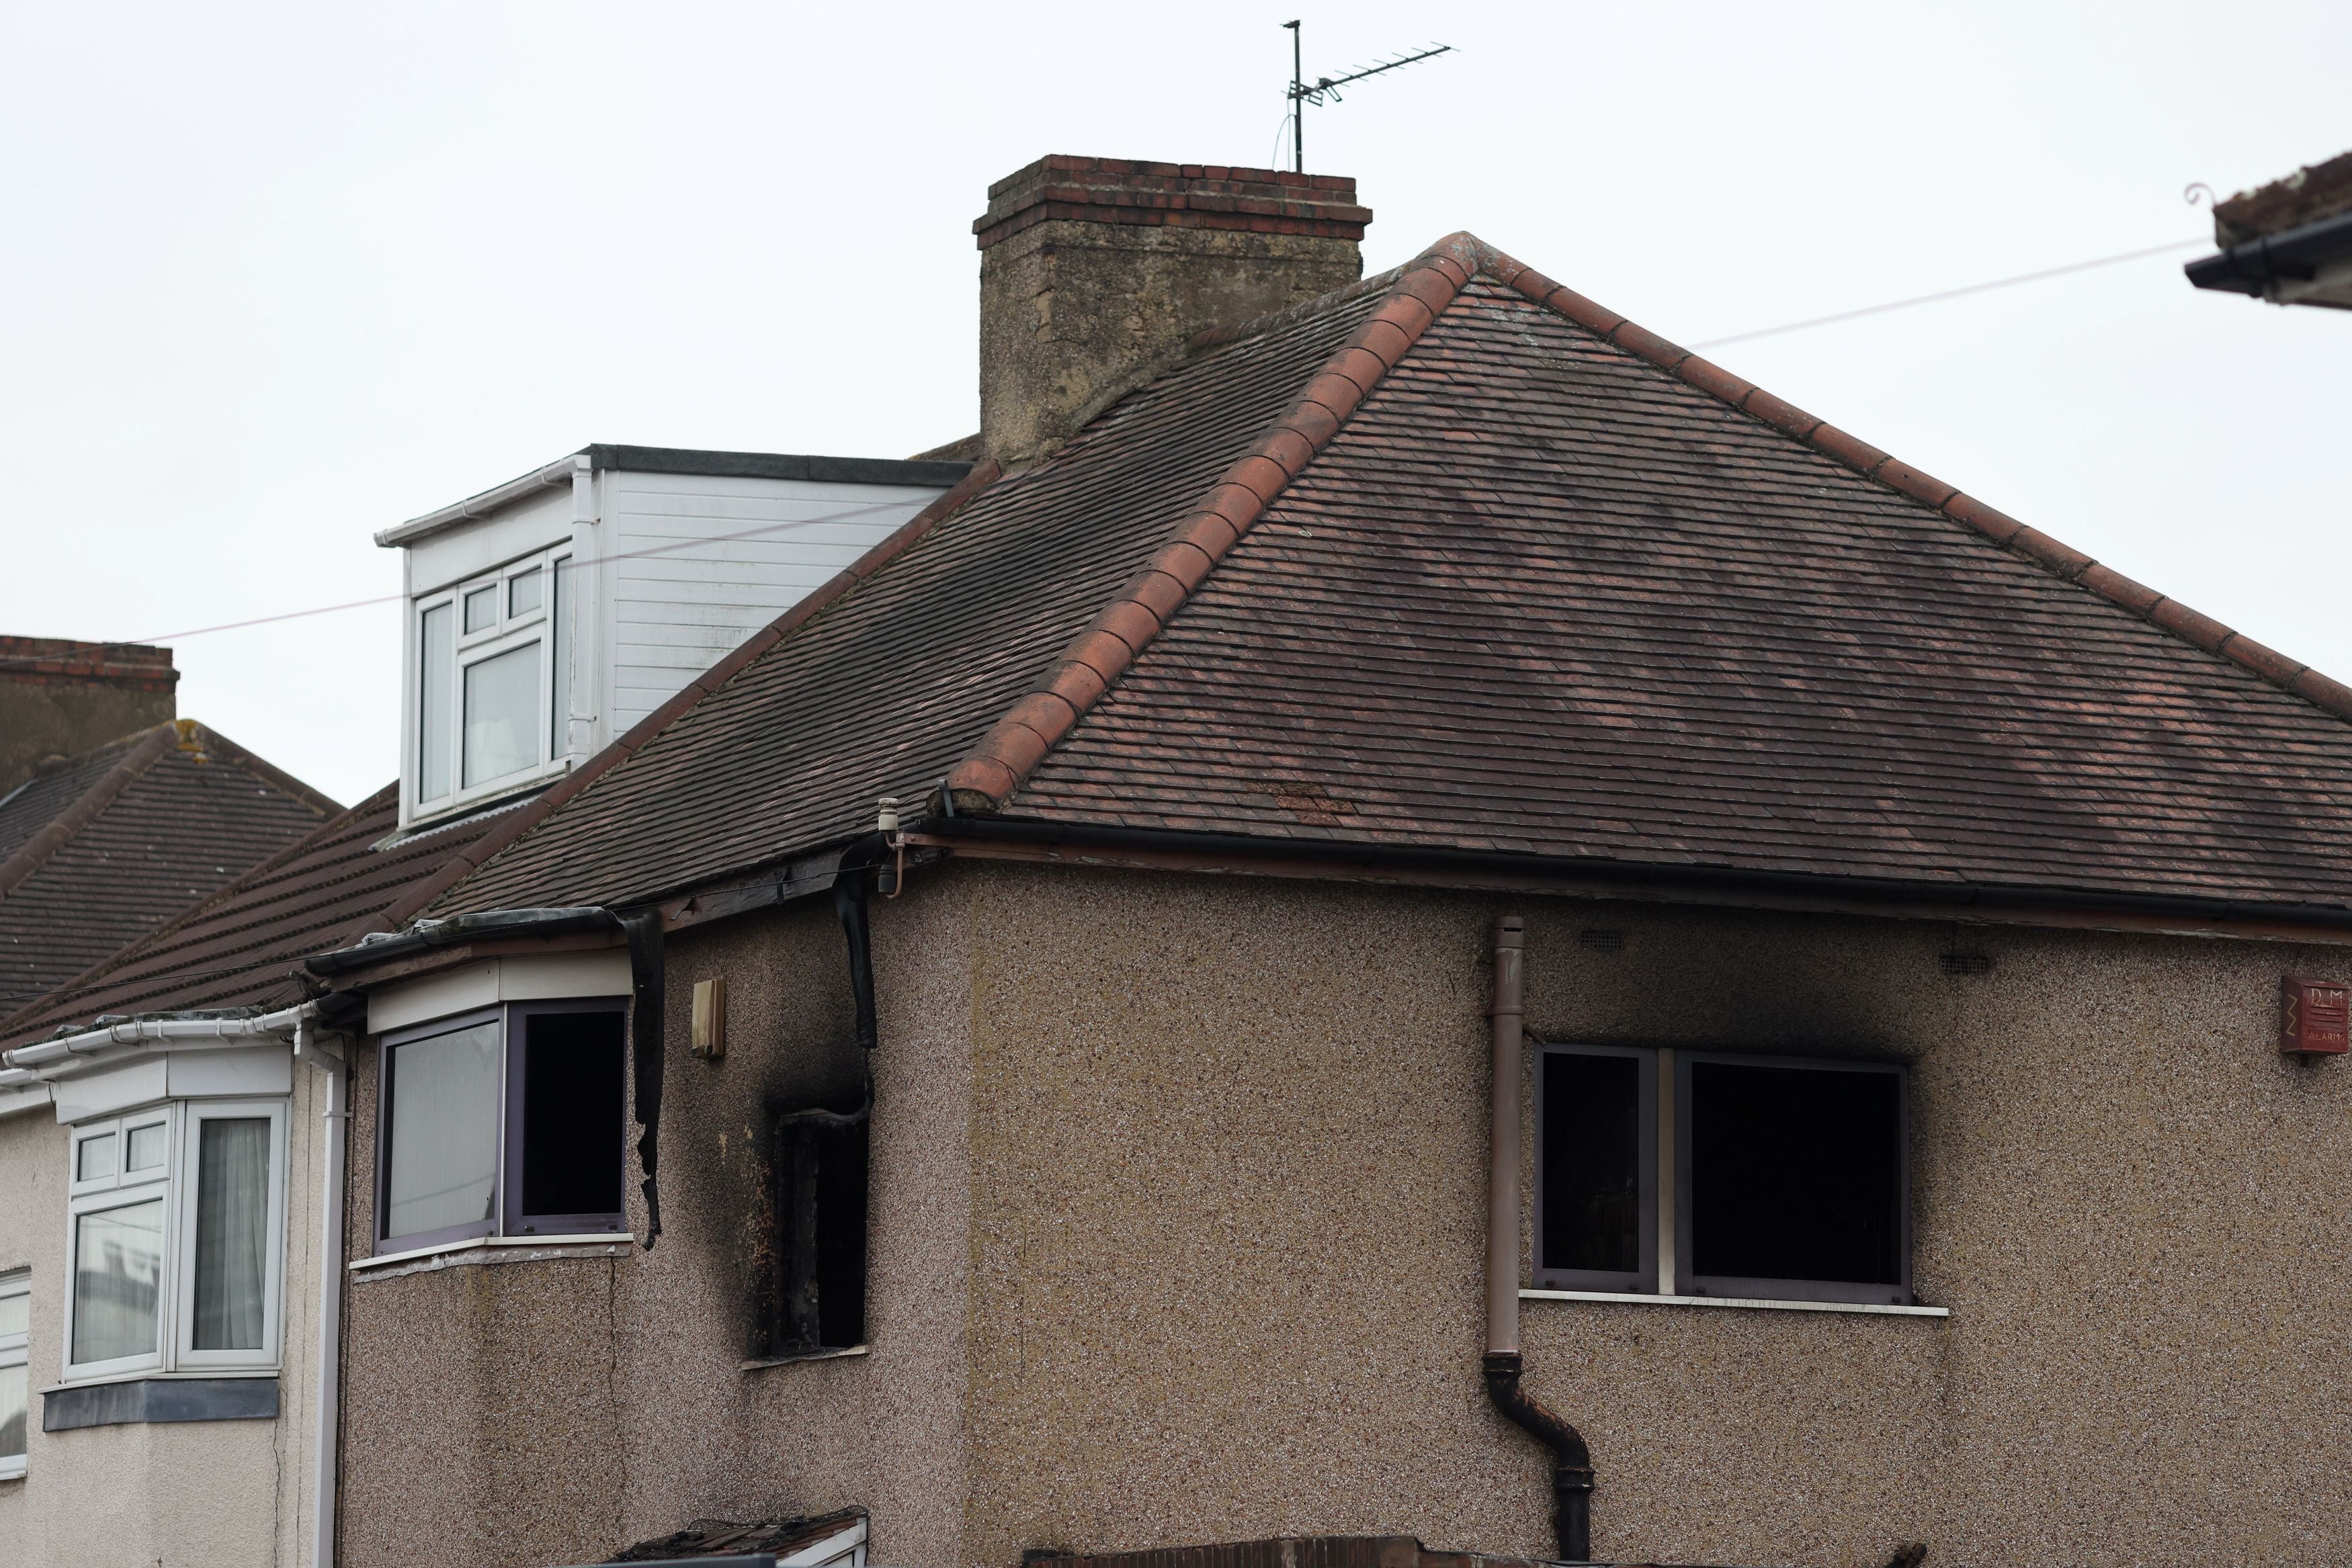 A view of a damaged building at the scene of a house fire in Bexleyheath, south-east London,